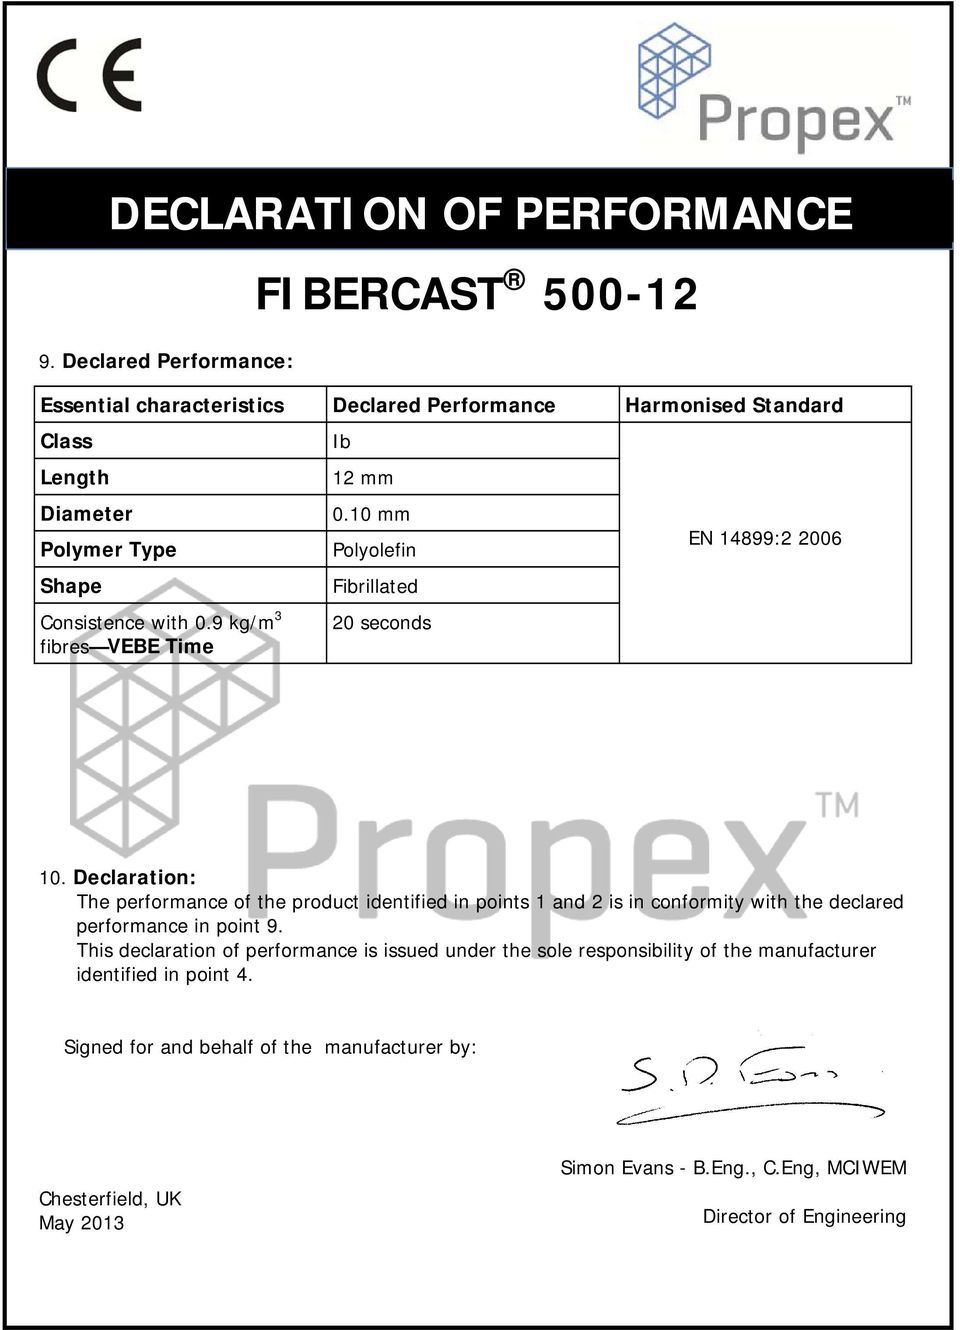 Declaration: The performance of the product identified in points 1 and 2 is in conformity with the declared performance in point 9.